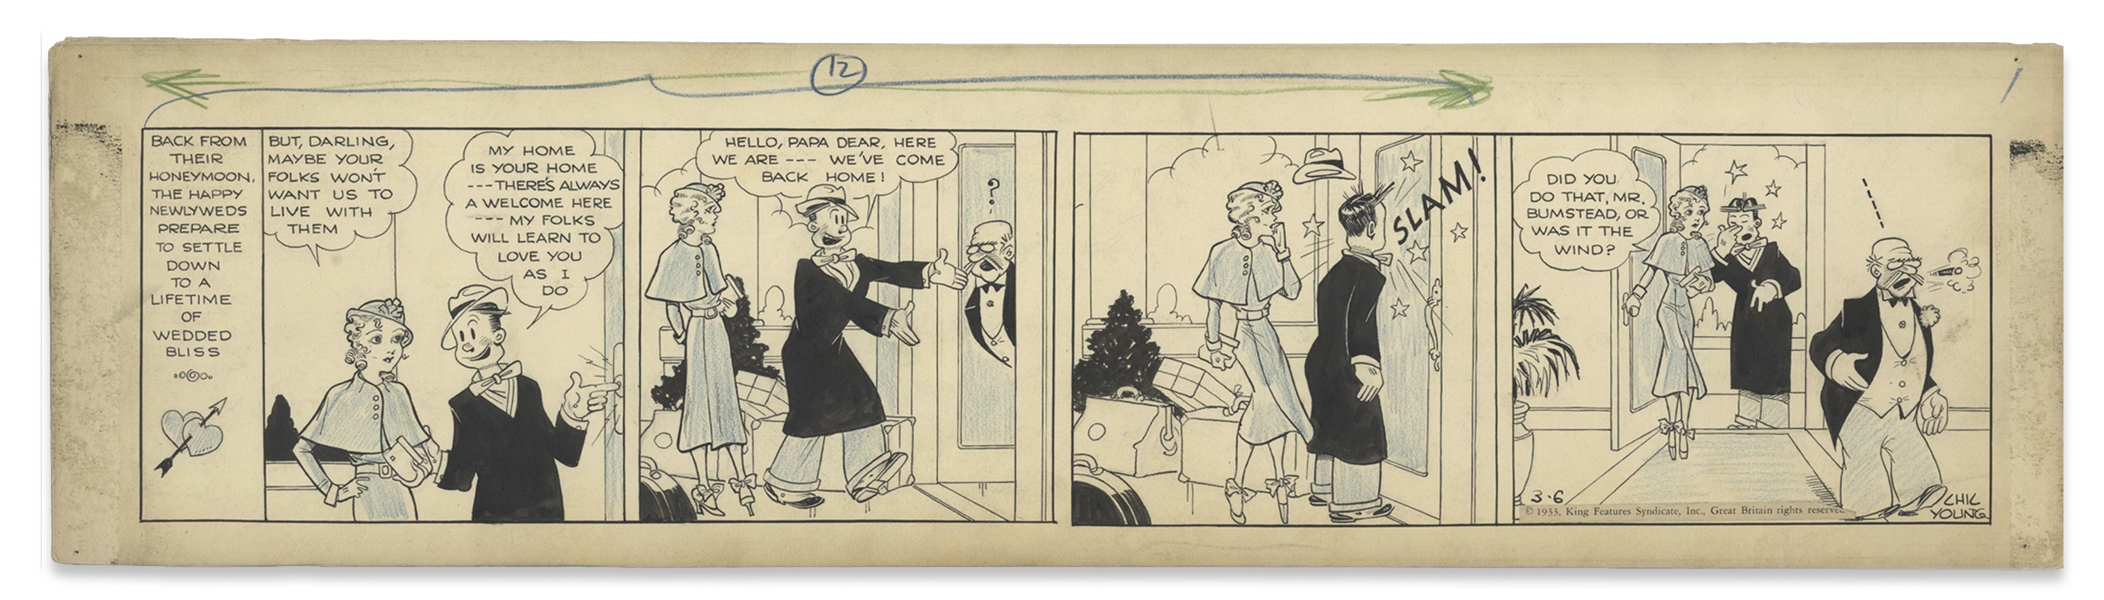 Chic Young Hand-Drawn ''Blondie'' Comic Strip From 1933 Titled ''Caught on the Draft'' -- Blondie & Dagwood's First Strip as a Married Couple at Home